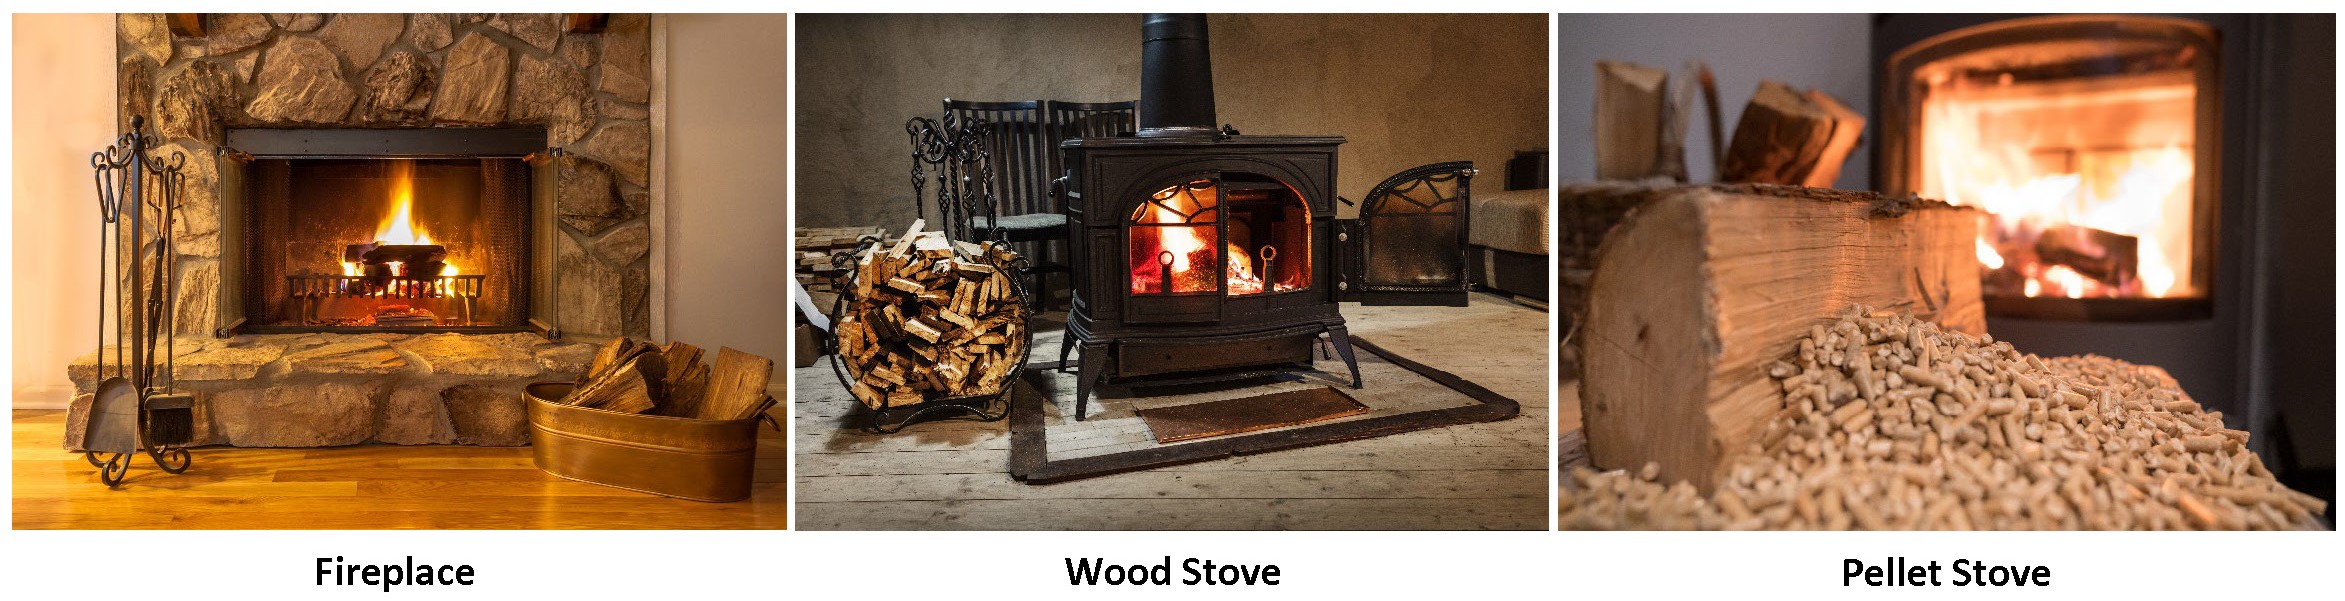 Photos of a fireplace, wood stove, and pellet stove, from left to right.